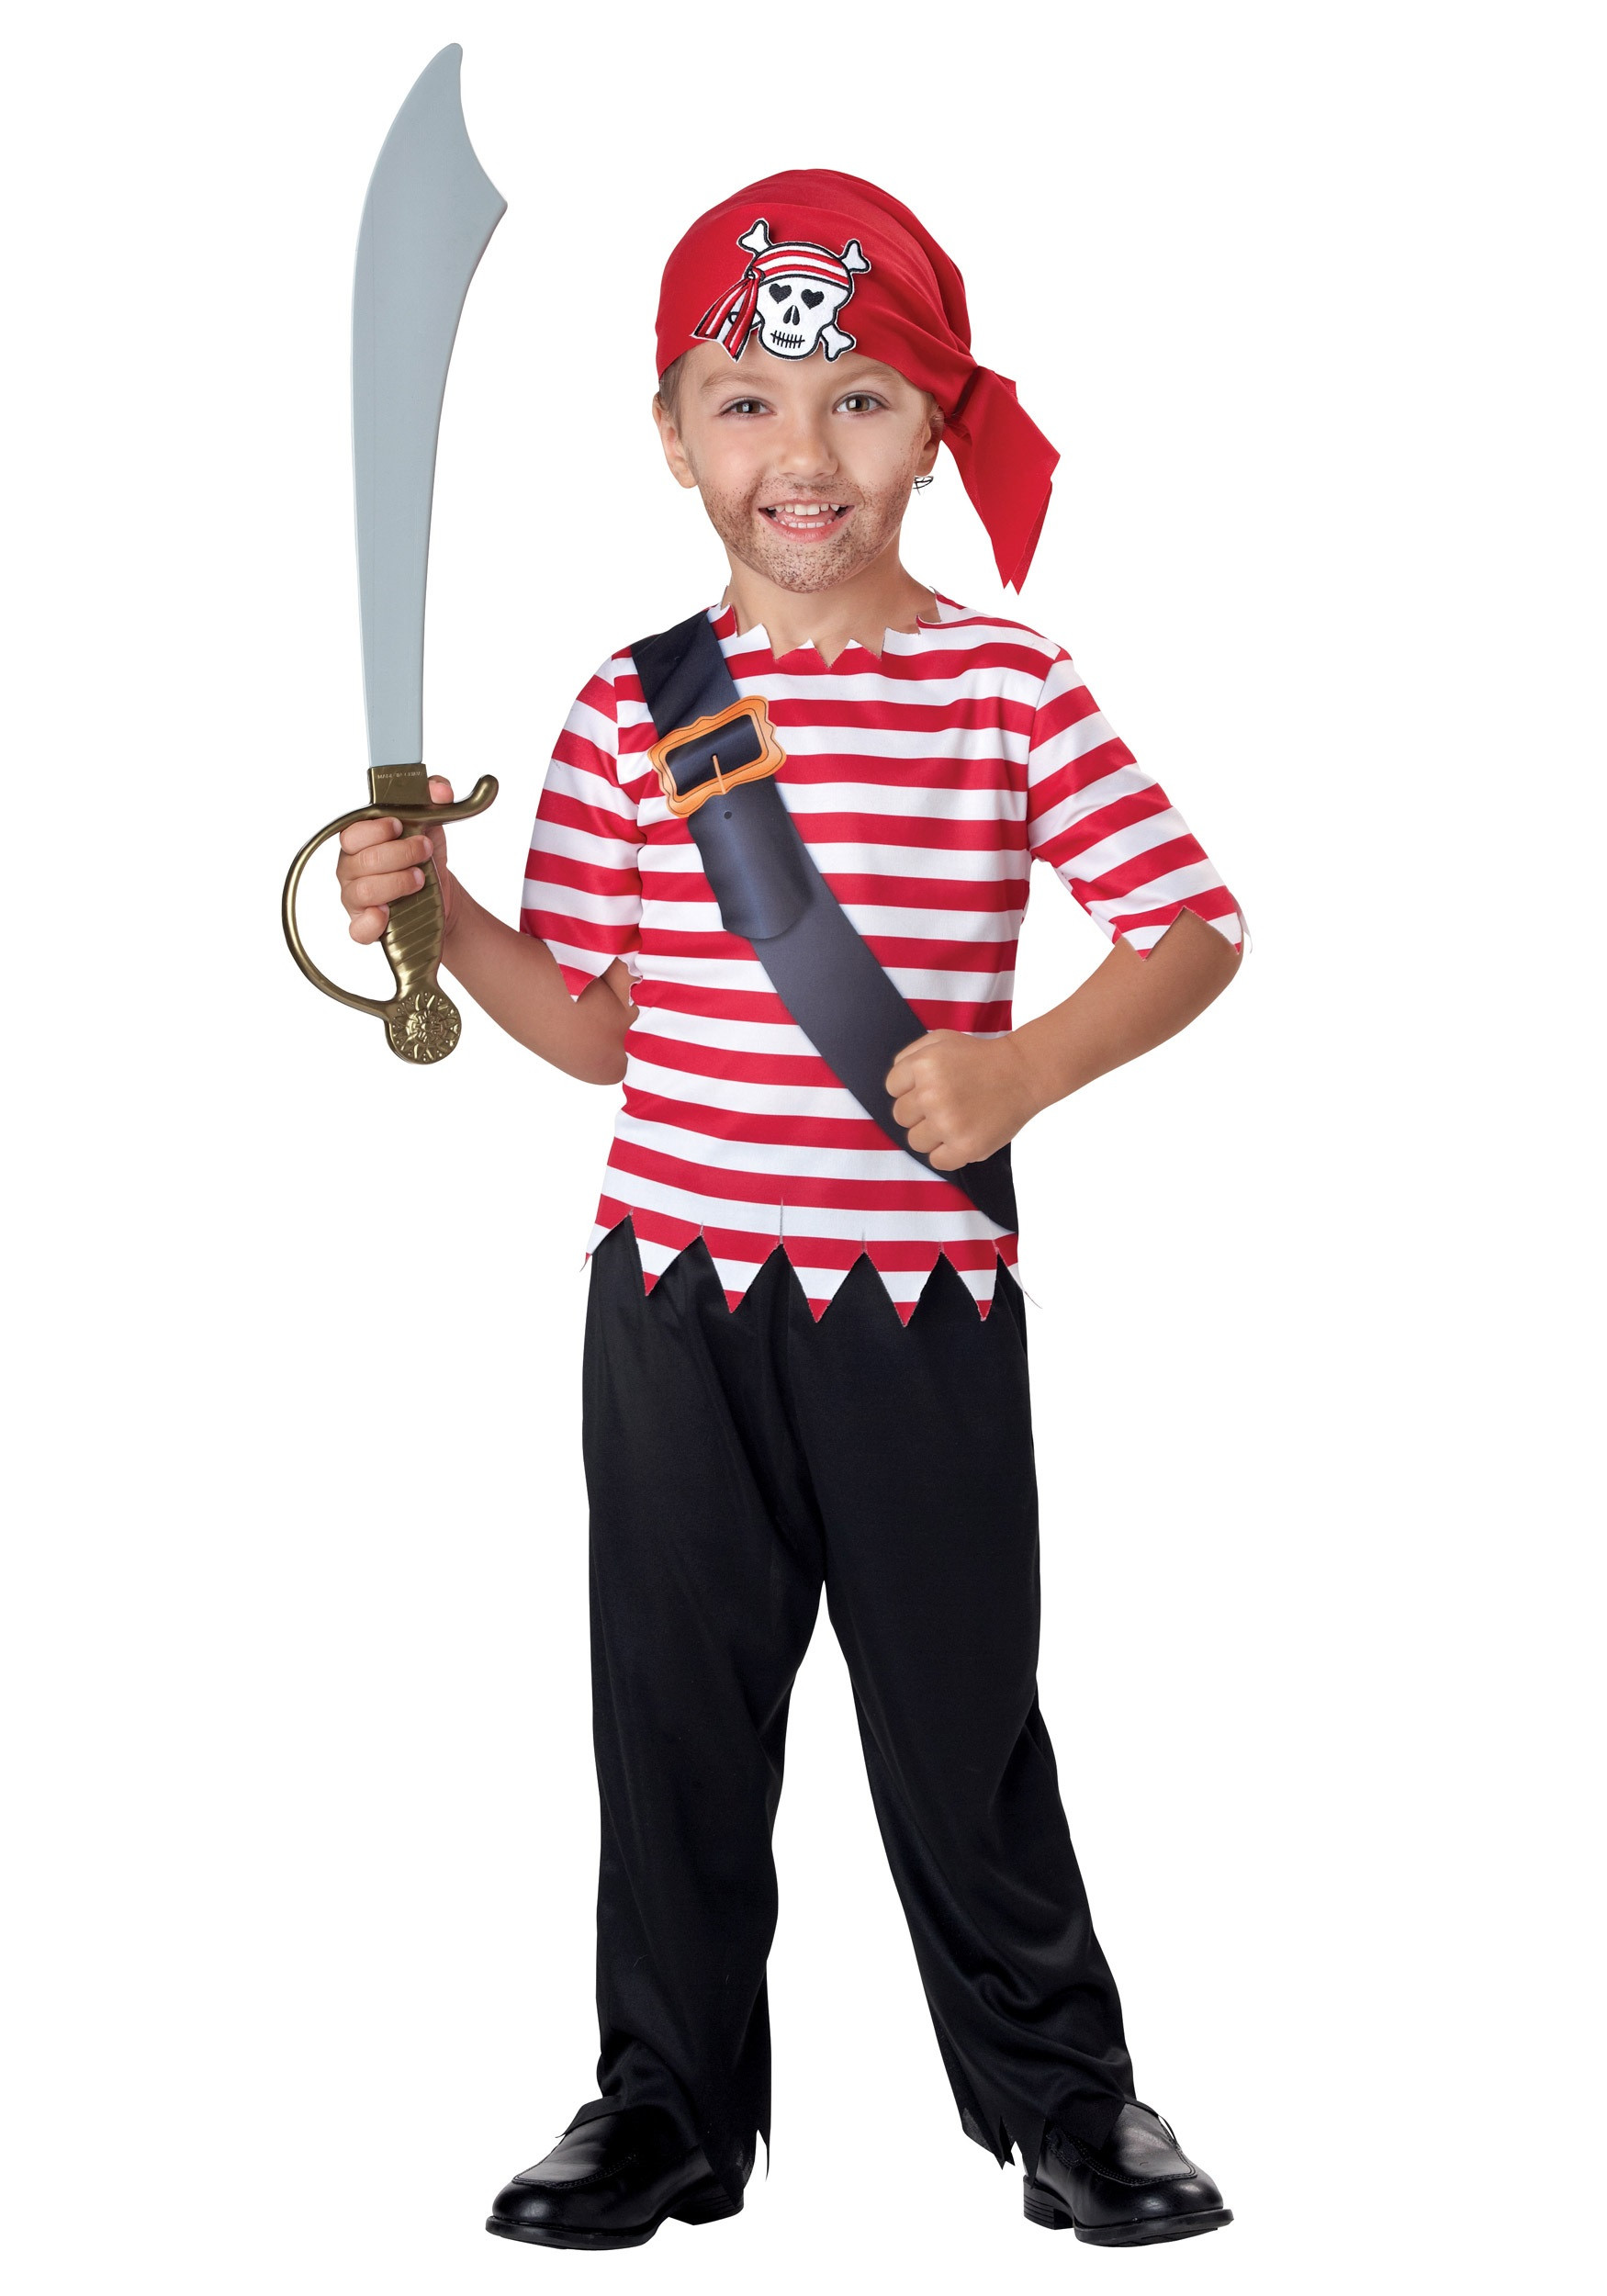 DIY Pirate Costumes For Kids
 Toddler Pirate Costume